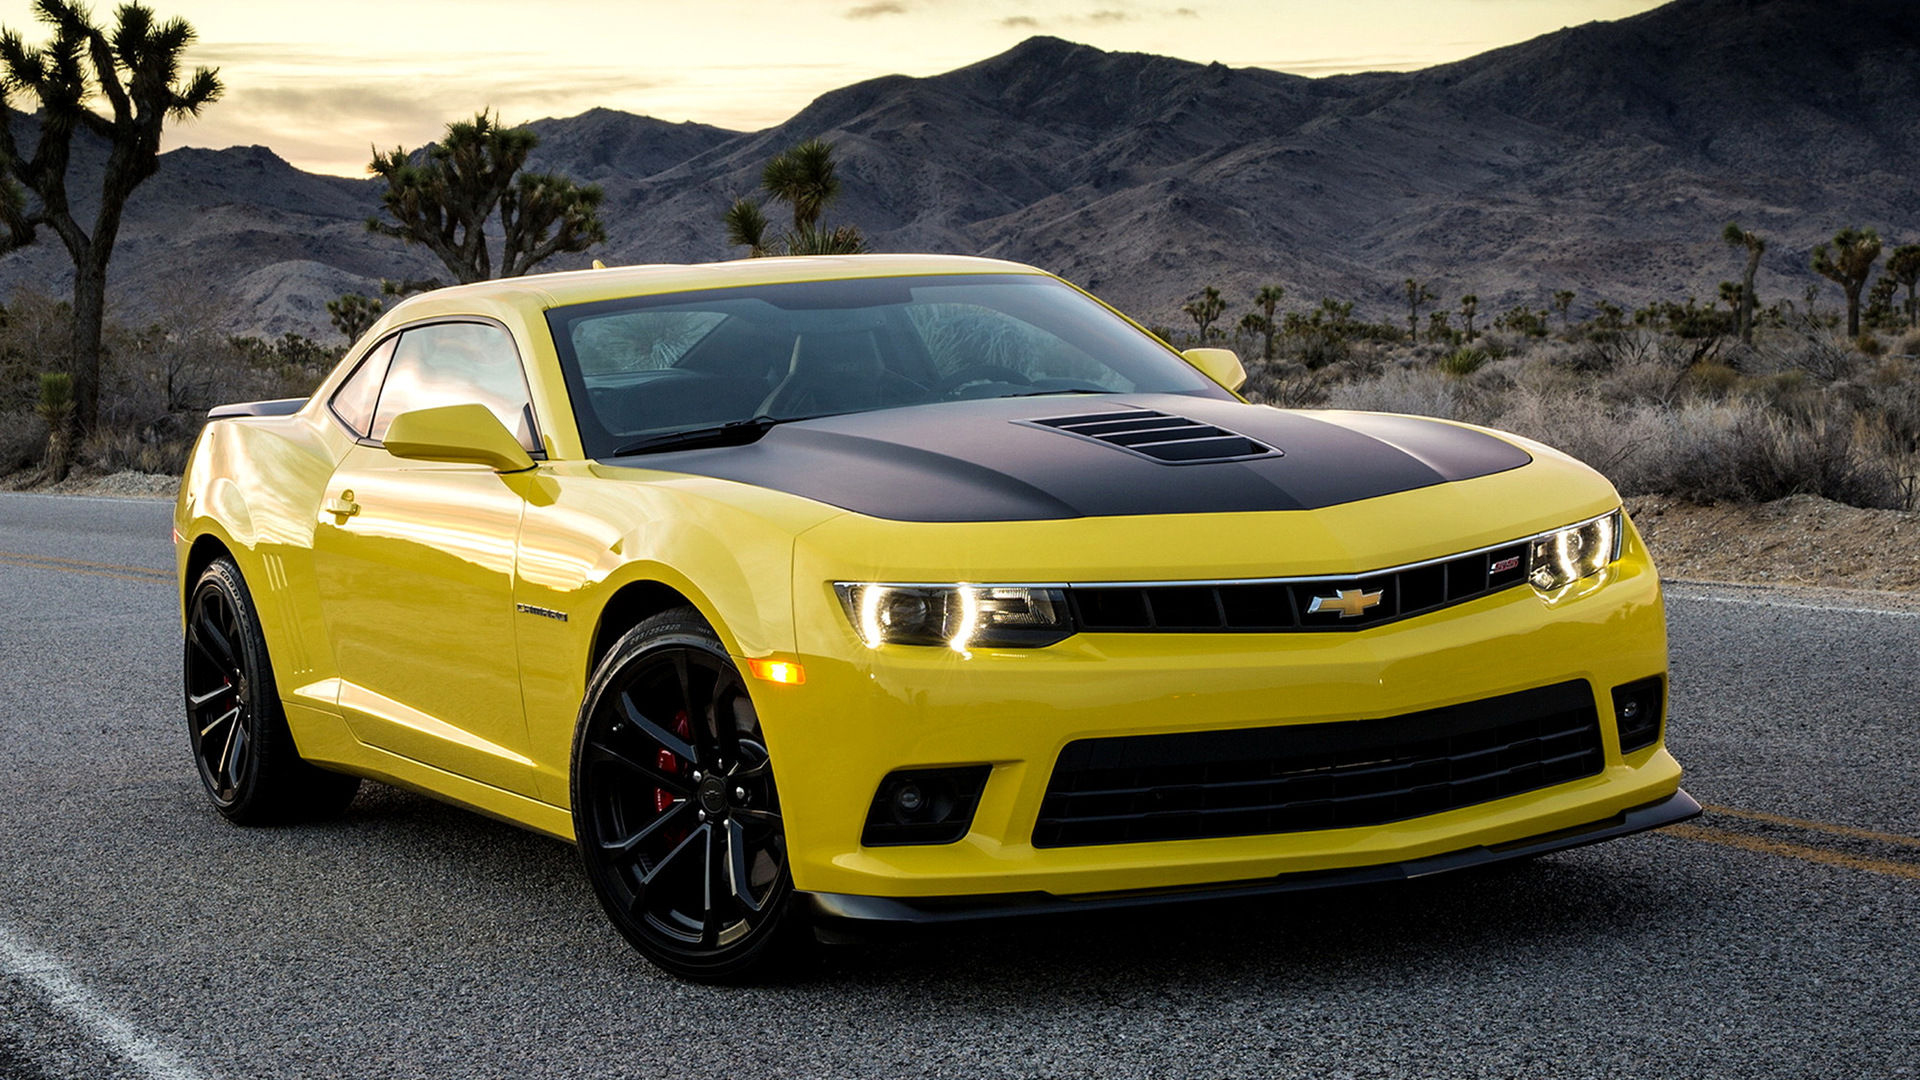 Chevrolet Camaro Ss 1le Wallpaper And HD Image